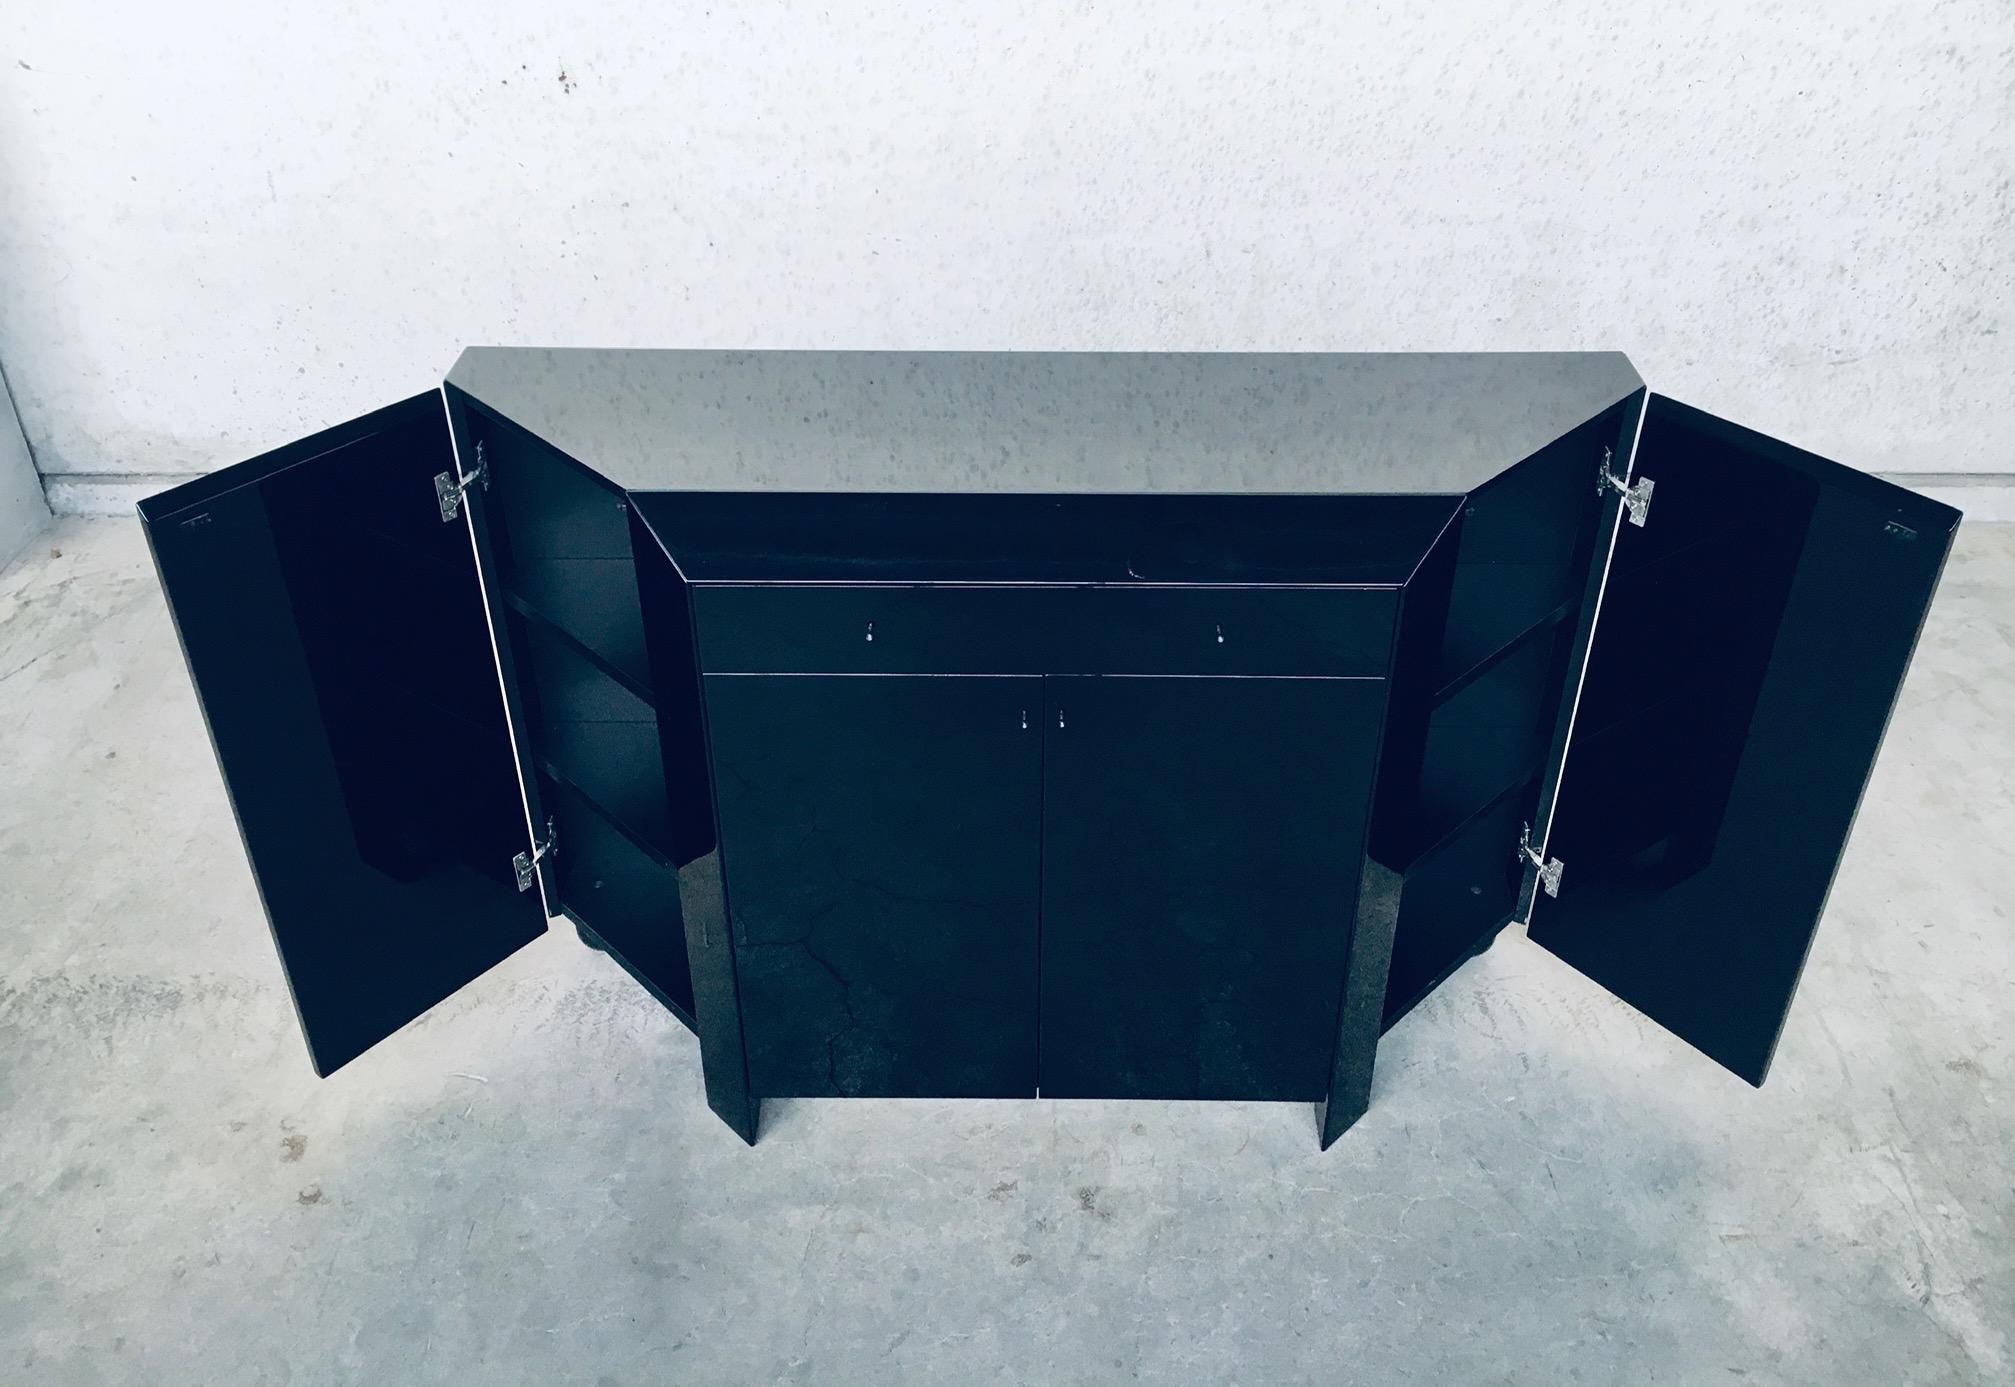 Late 20th Century Postmodern Architectural Design Bar Chest by Interlübke, Germany 1980's